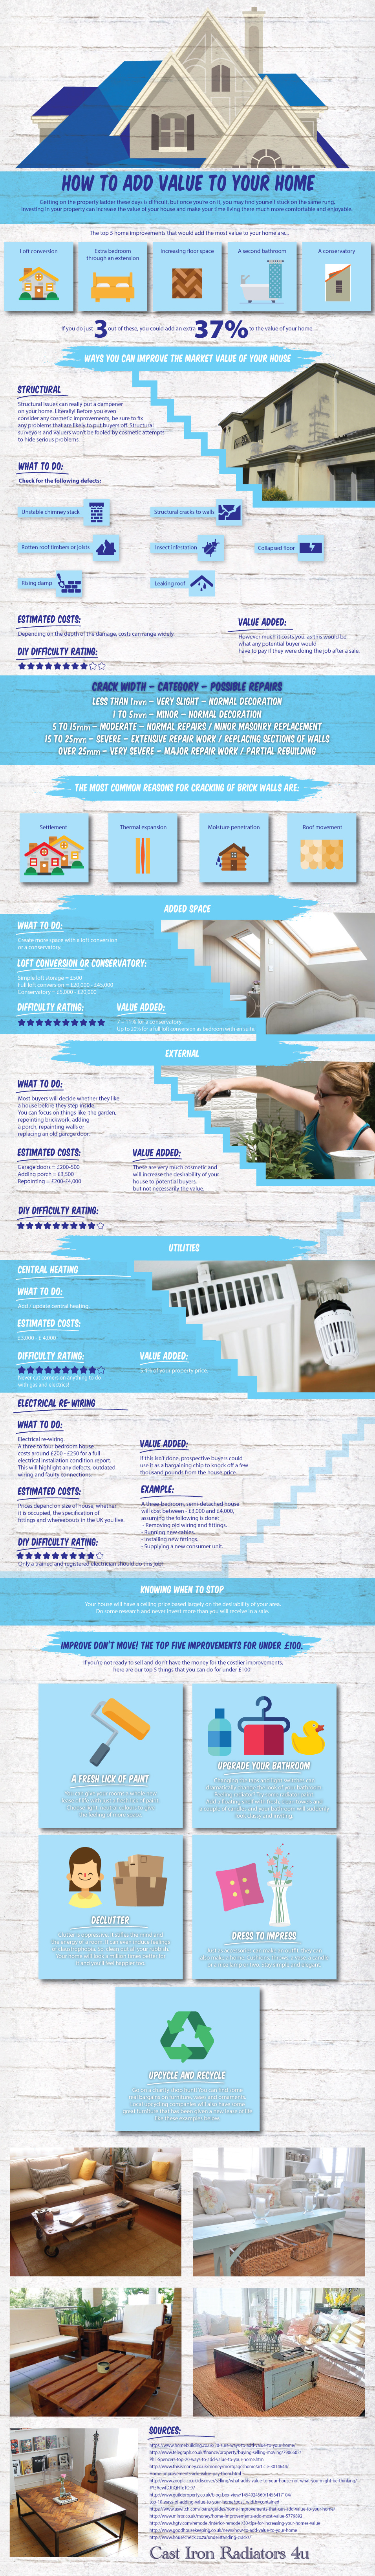 How to Add Value to Your Home by Castironradiators4u.co.uk